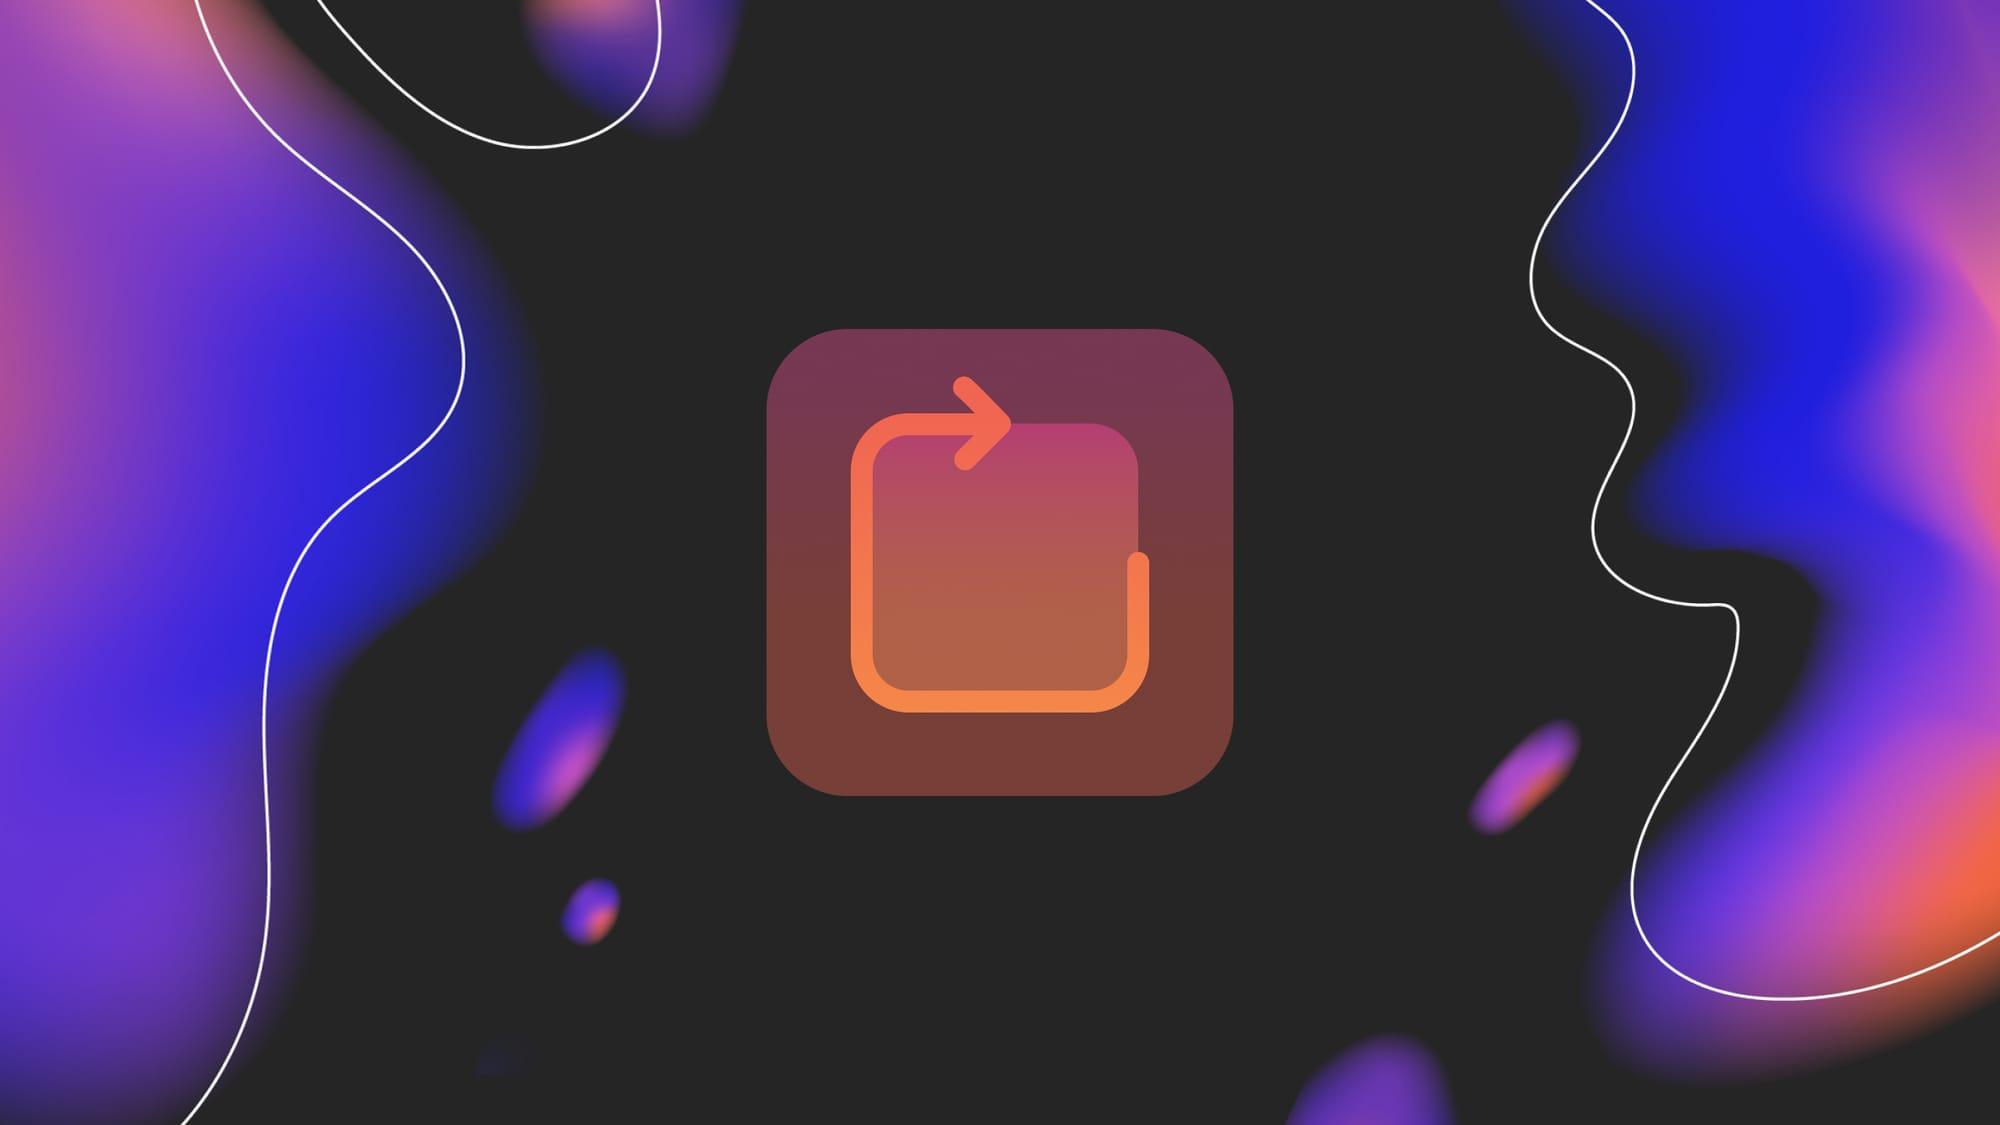 Create an animated splash screen for your React Native app with Lottie